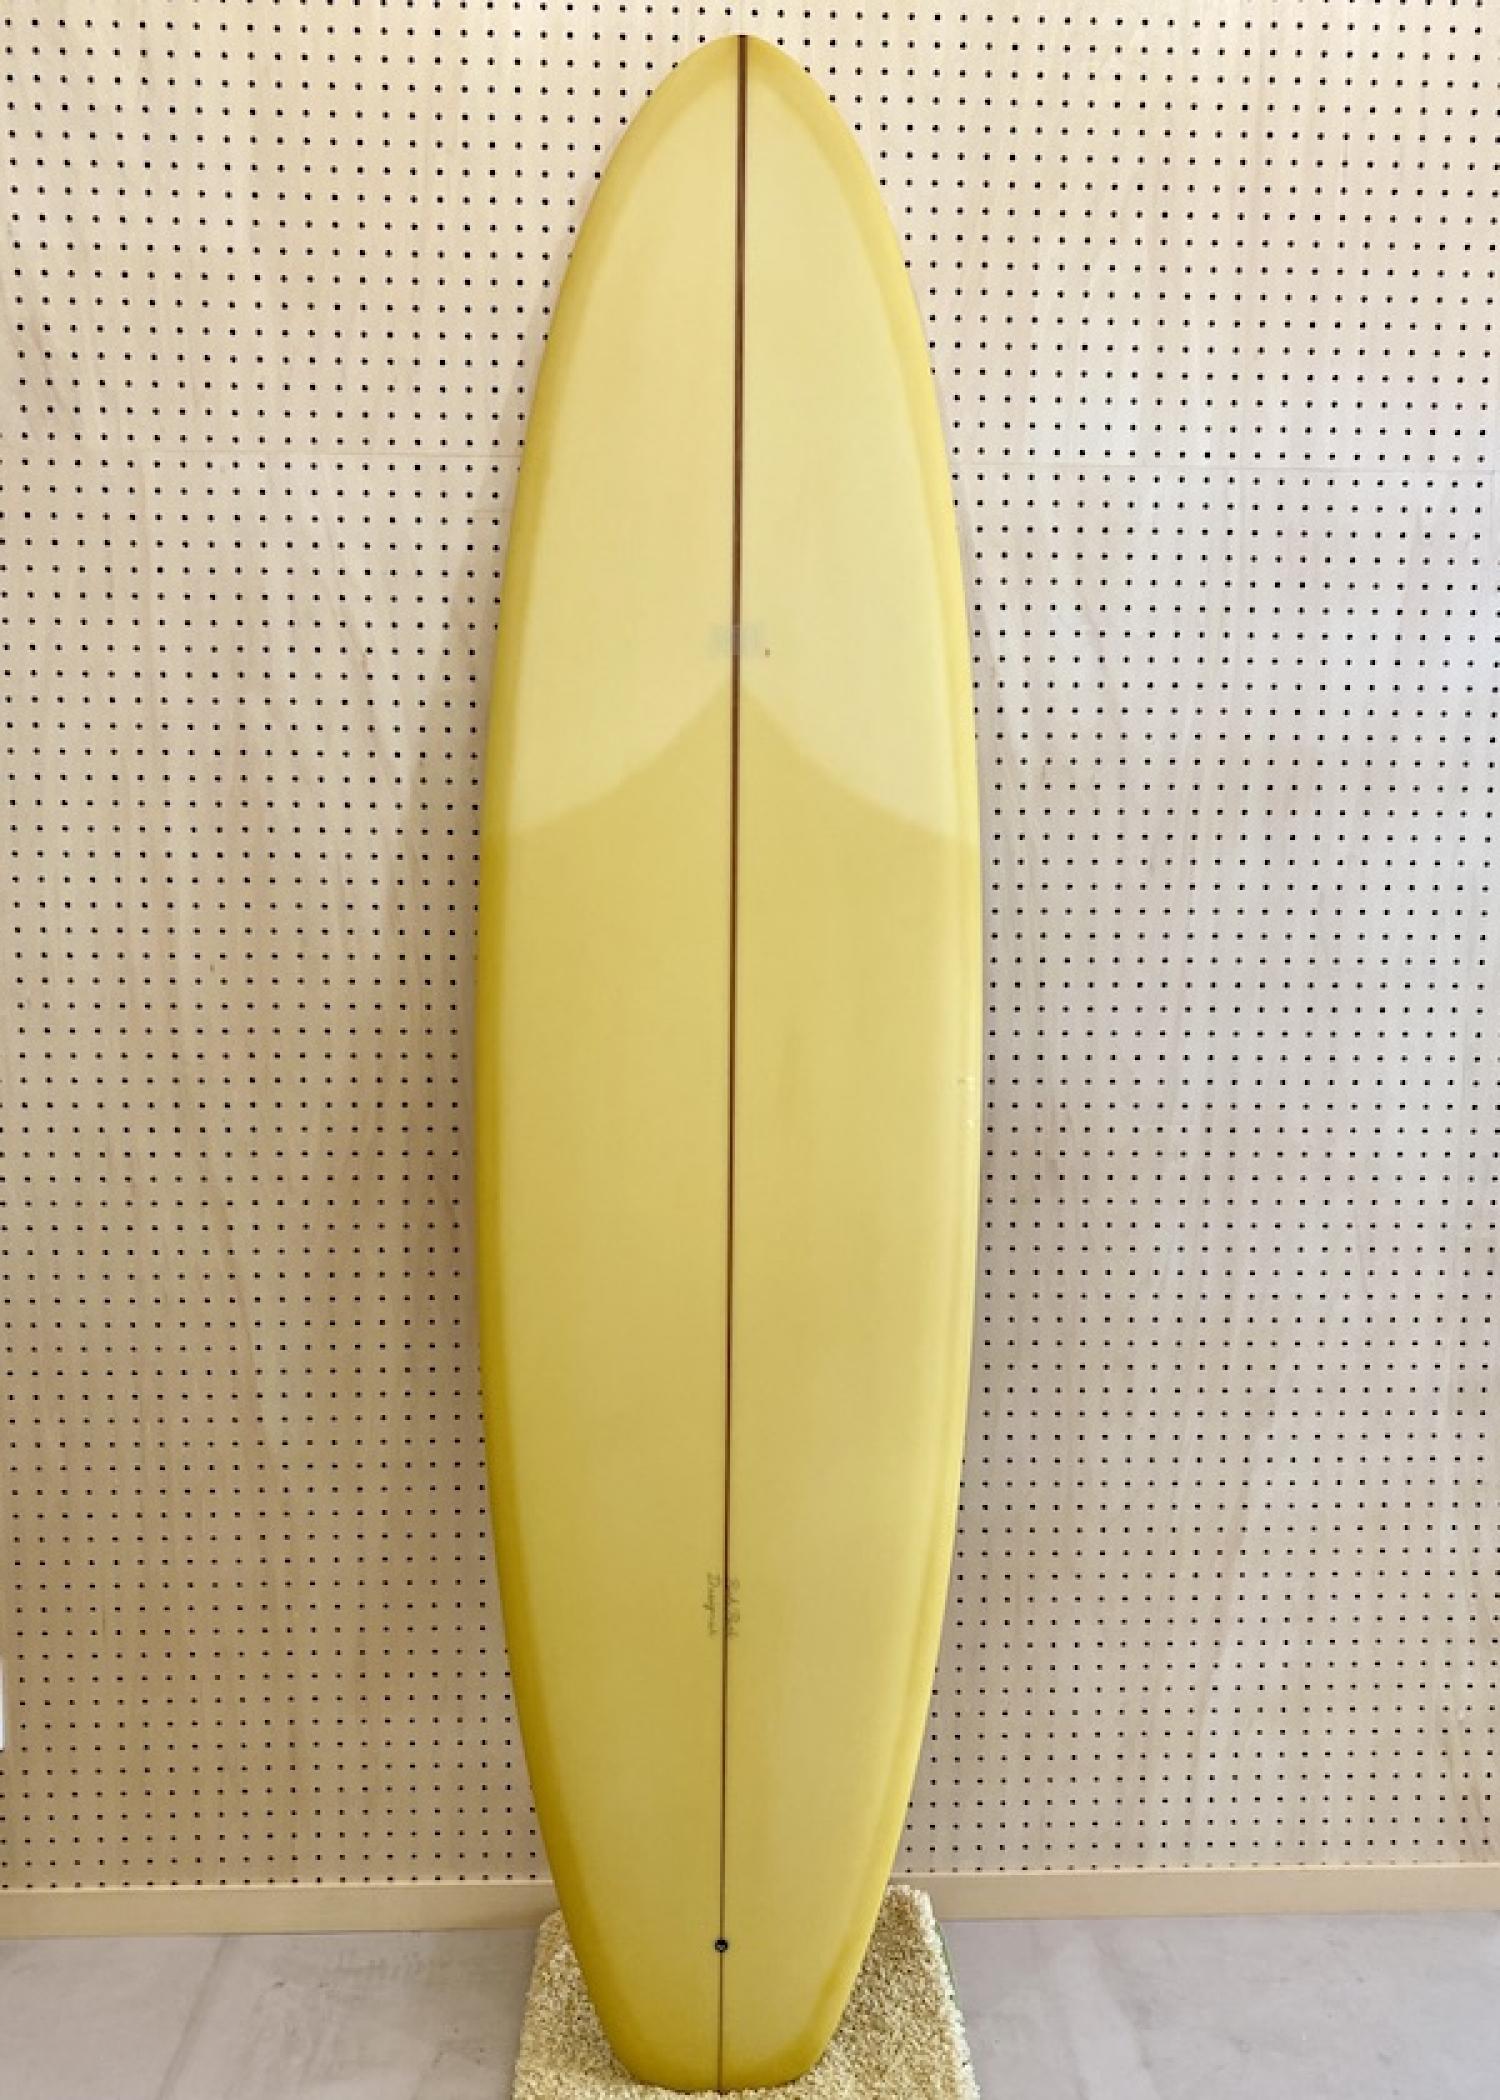 USED (Starboard MAST MONOLITHIC CARBON 72 cm）|Okinawa surf shop